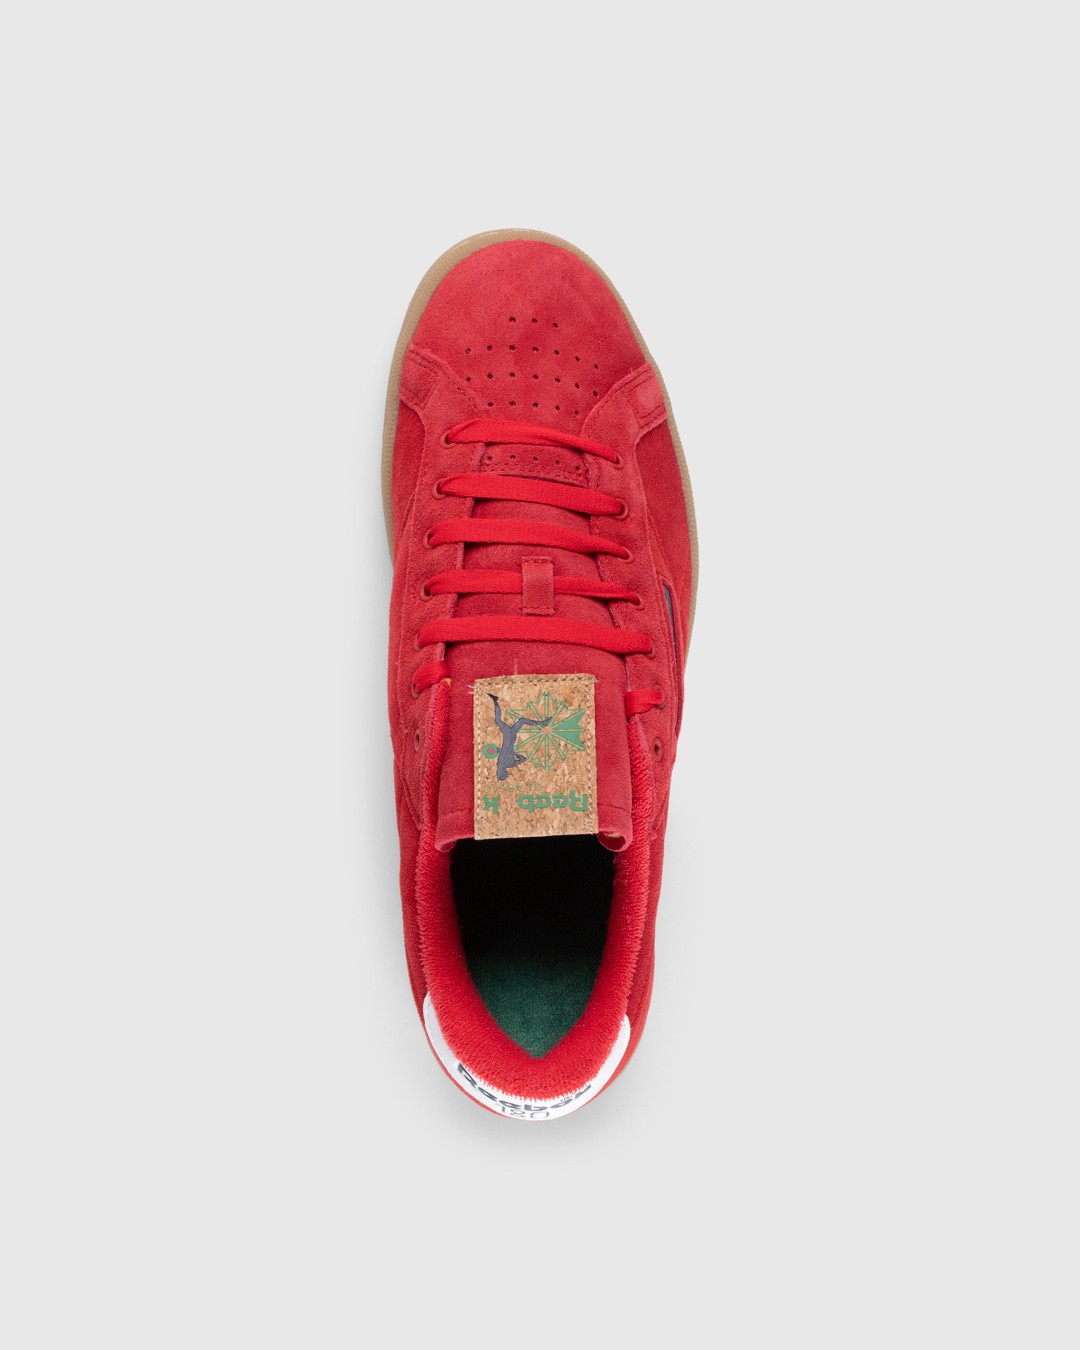 Reebok – Club C Grounds Red - Sneakers - Red - Image 5